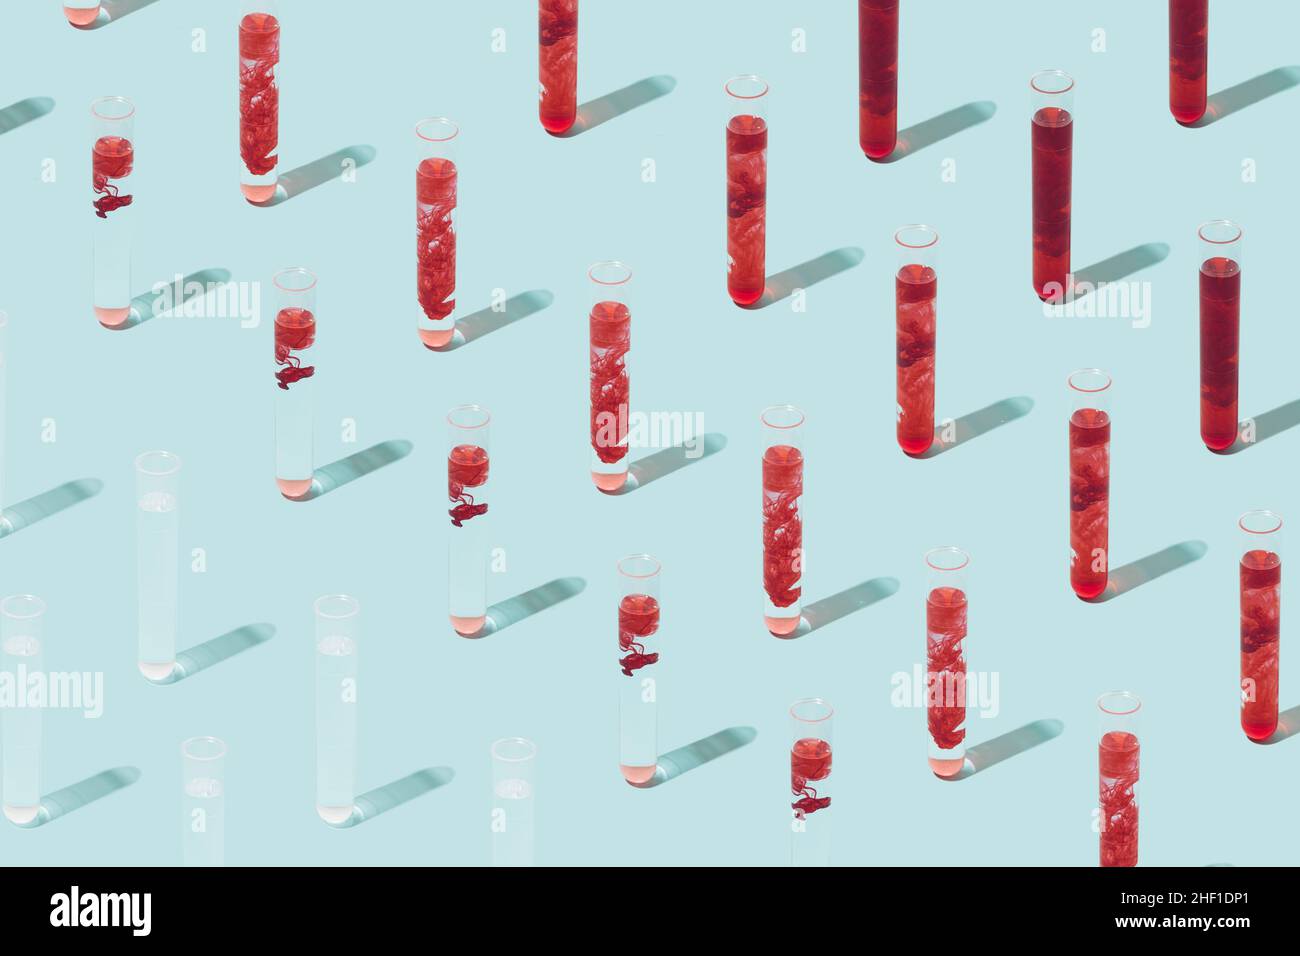 Pattern made of various test tubes containing blood on a light blue background. Cure discovery minimal concept. Stock Photo